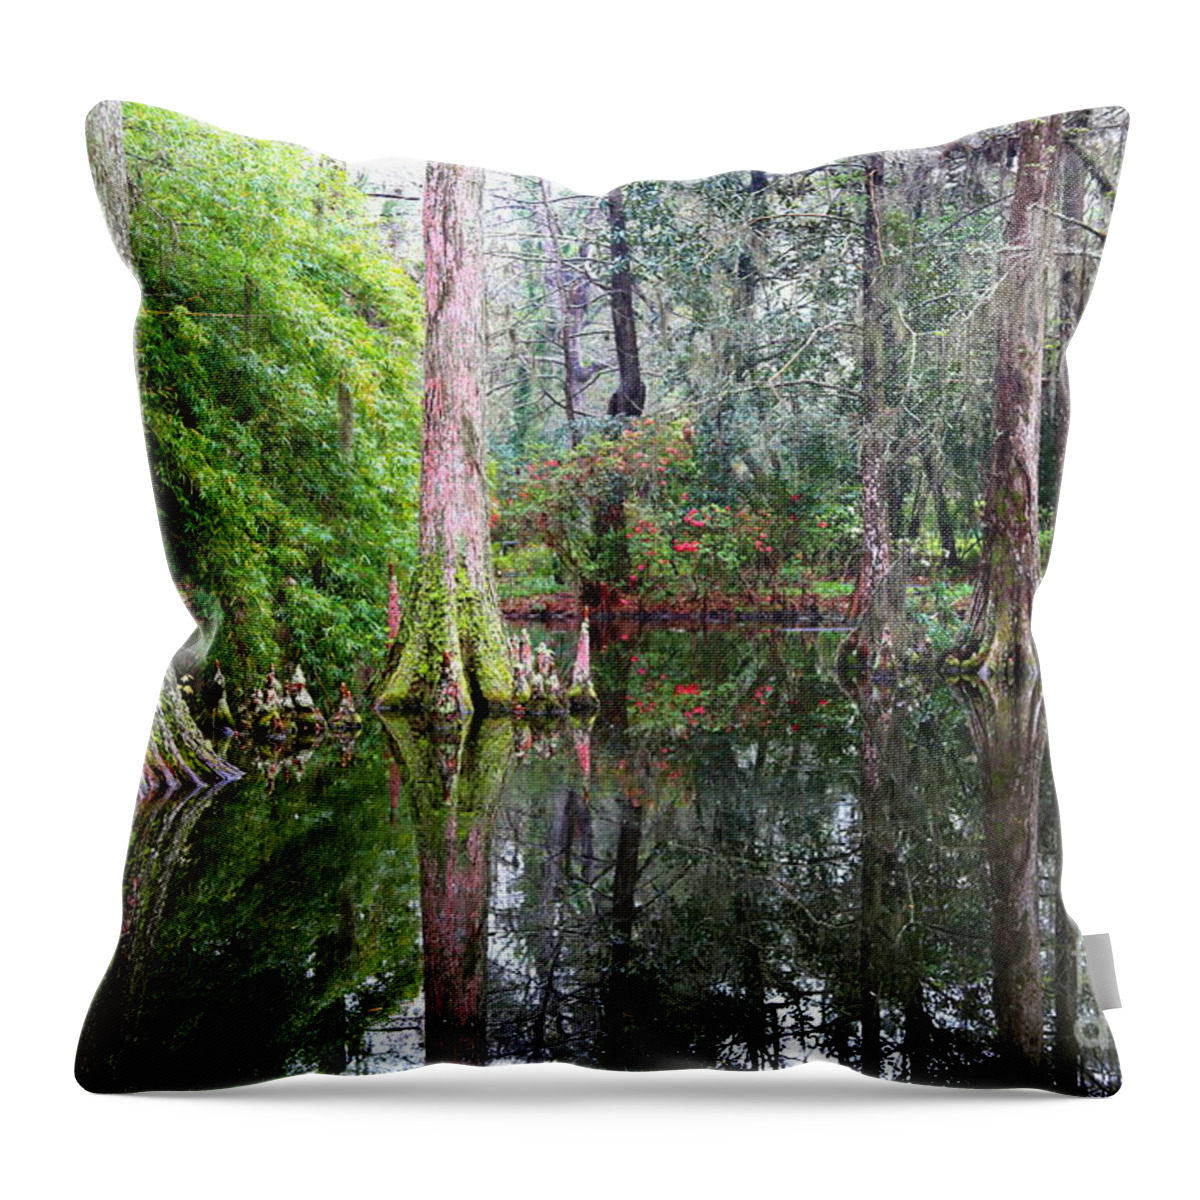 Cypress Swamp Throw Pillow featuring the photograph Magical Cypress Swamp by Carol Groenen